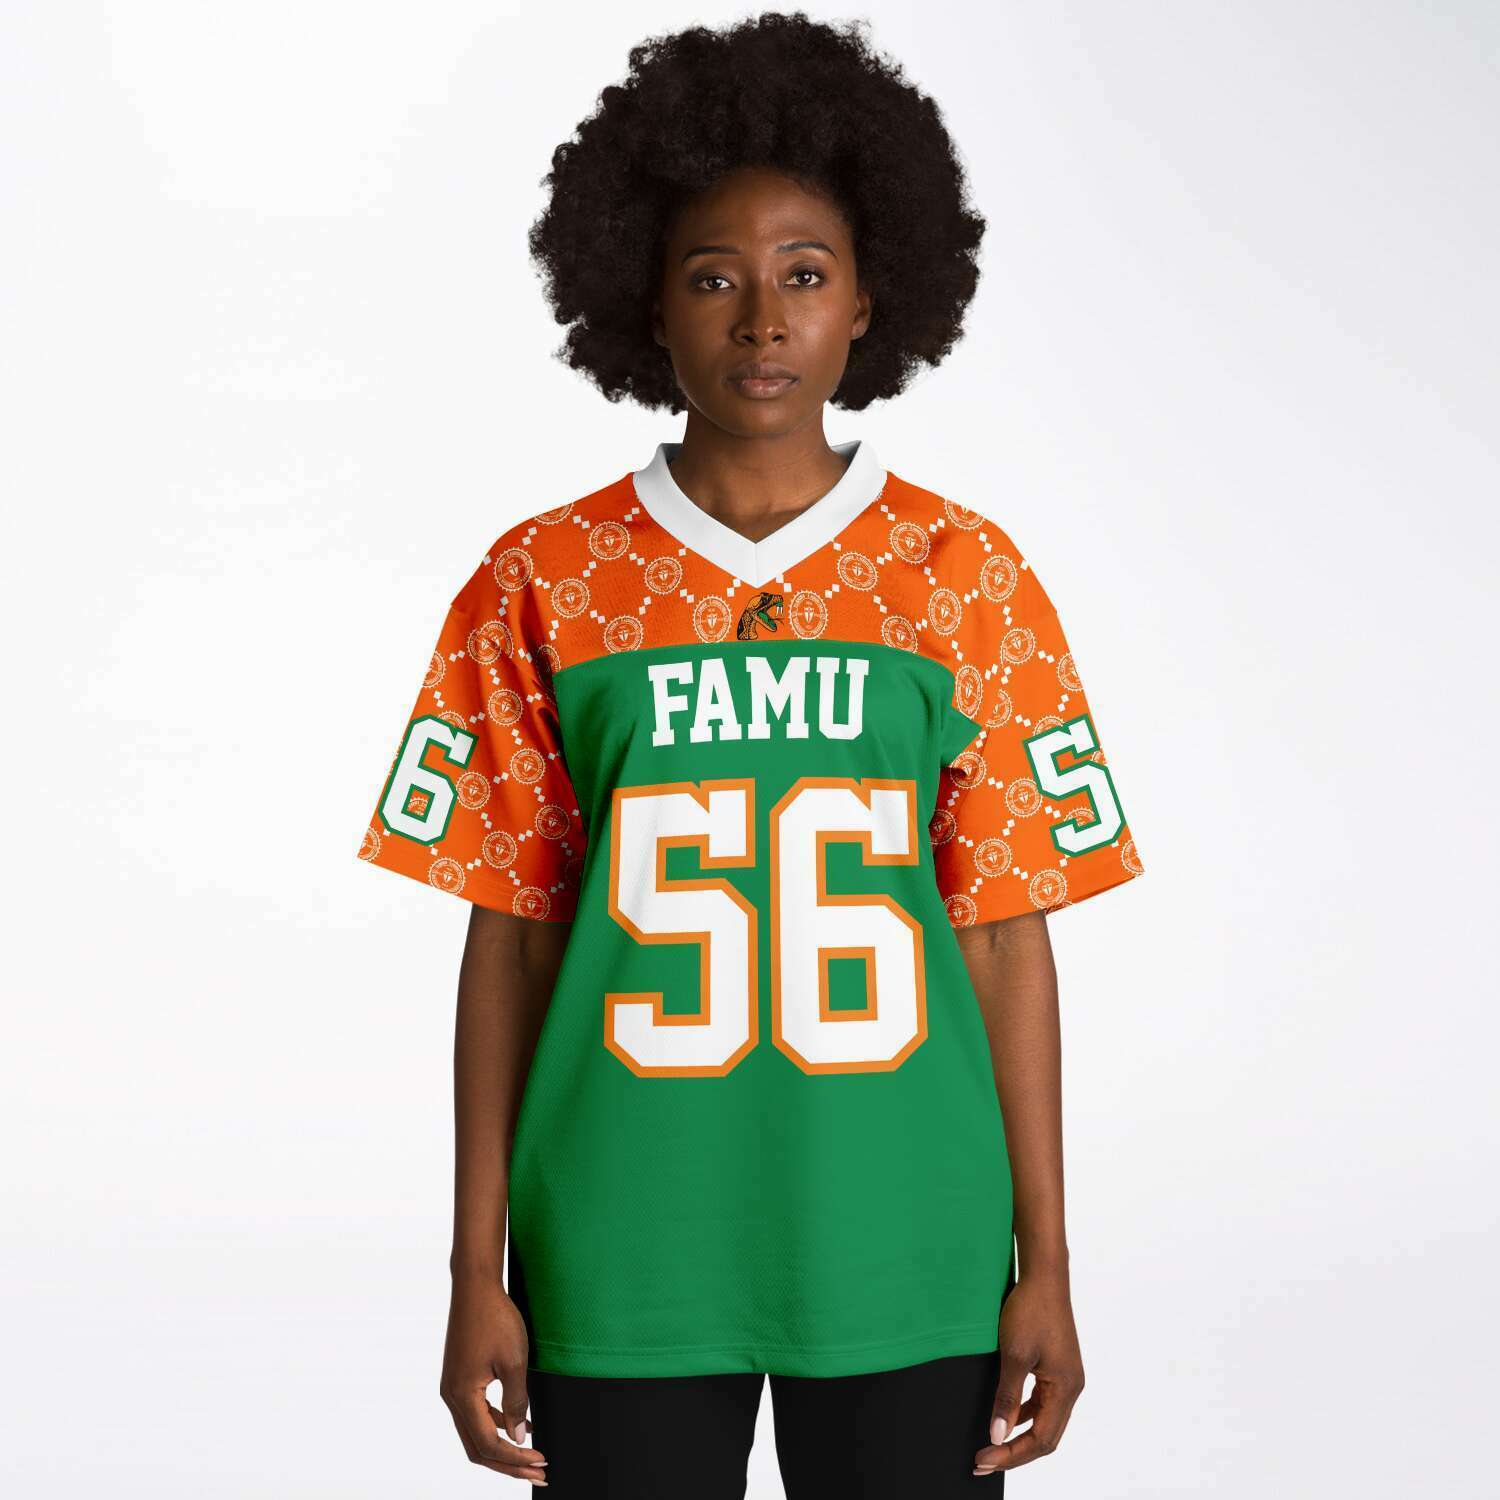 Vintage FAMU Florida AM Rattlers #23 Football Game used Jersey XL